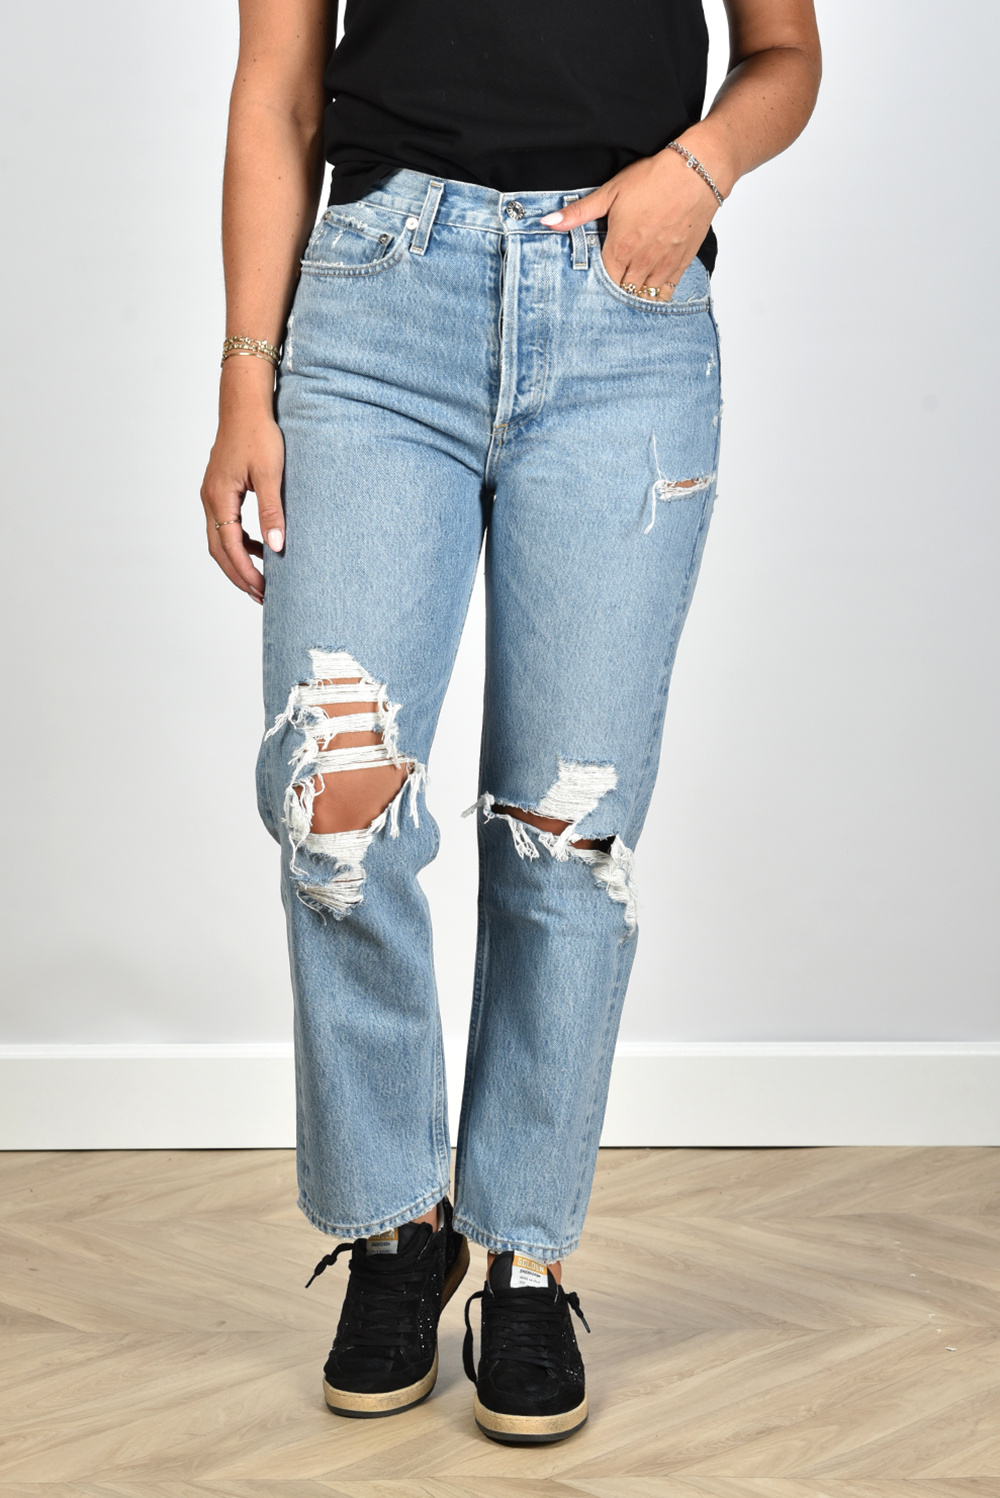 Agolde jeans 90s A069C-811 blauw